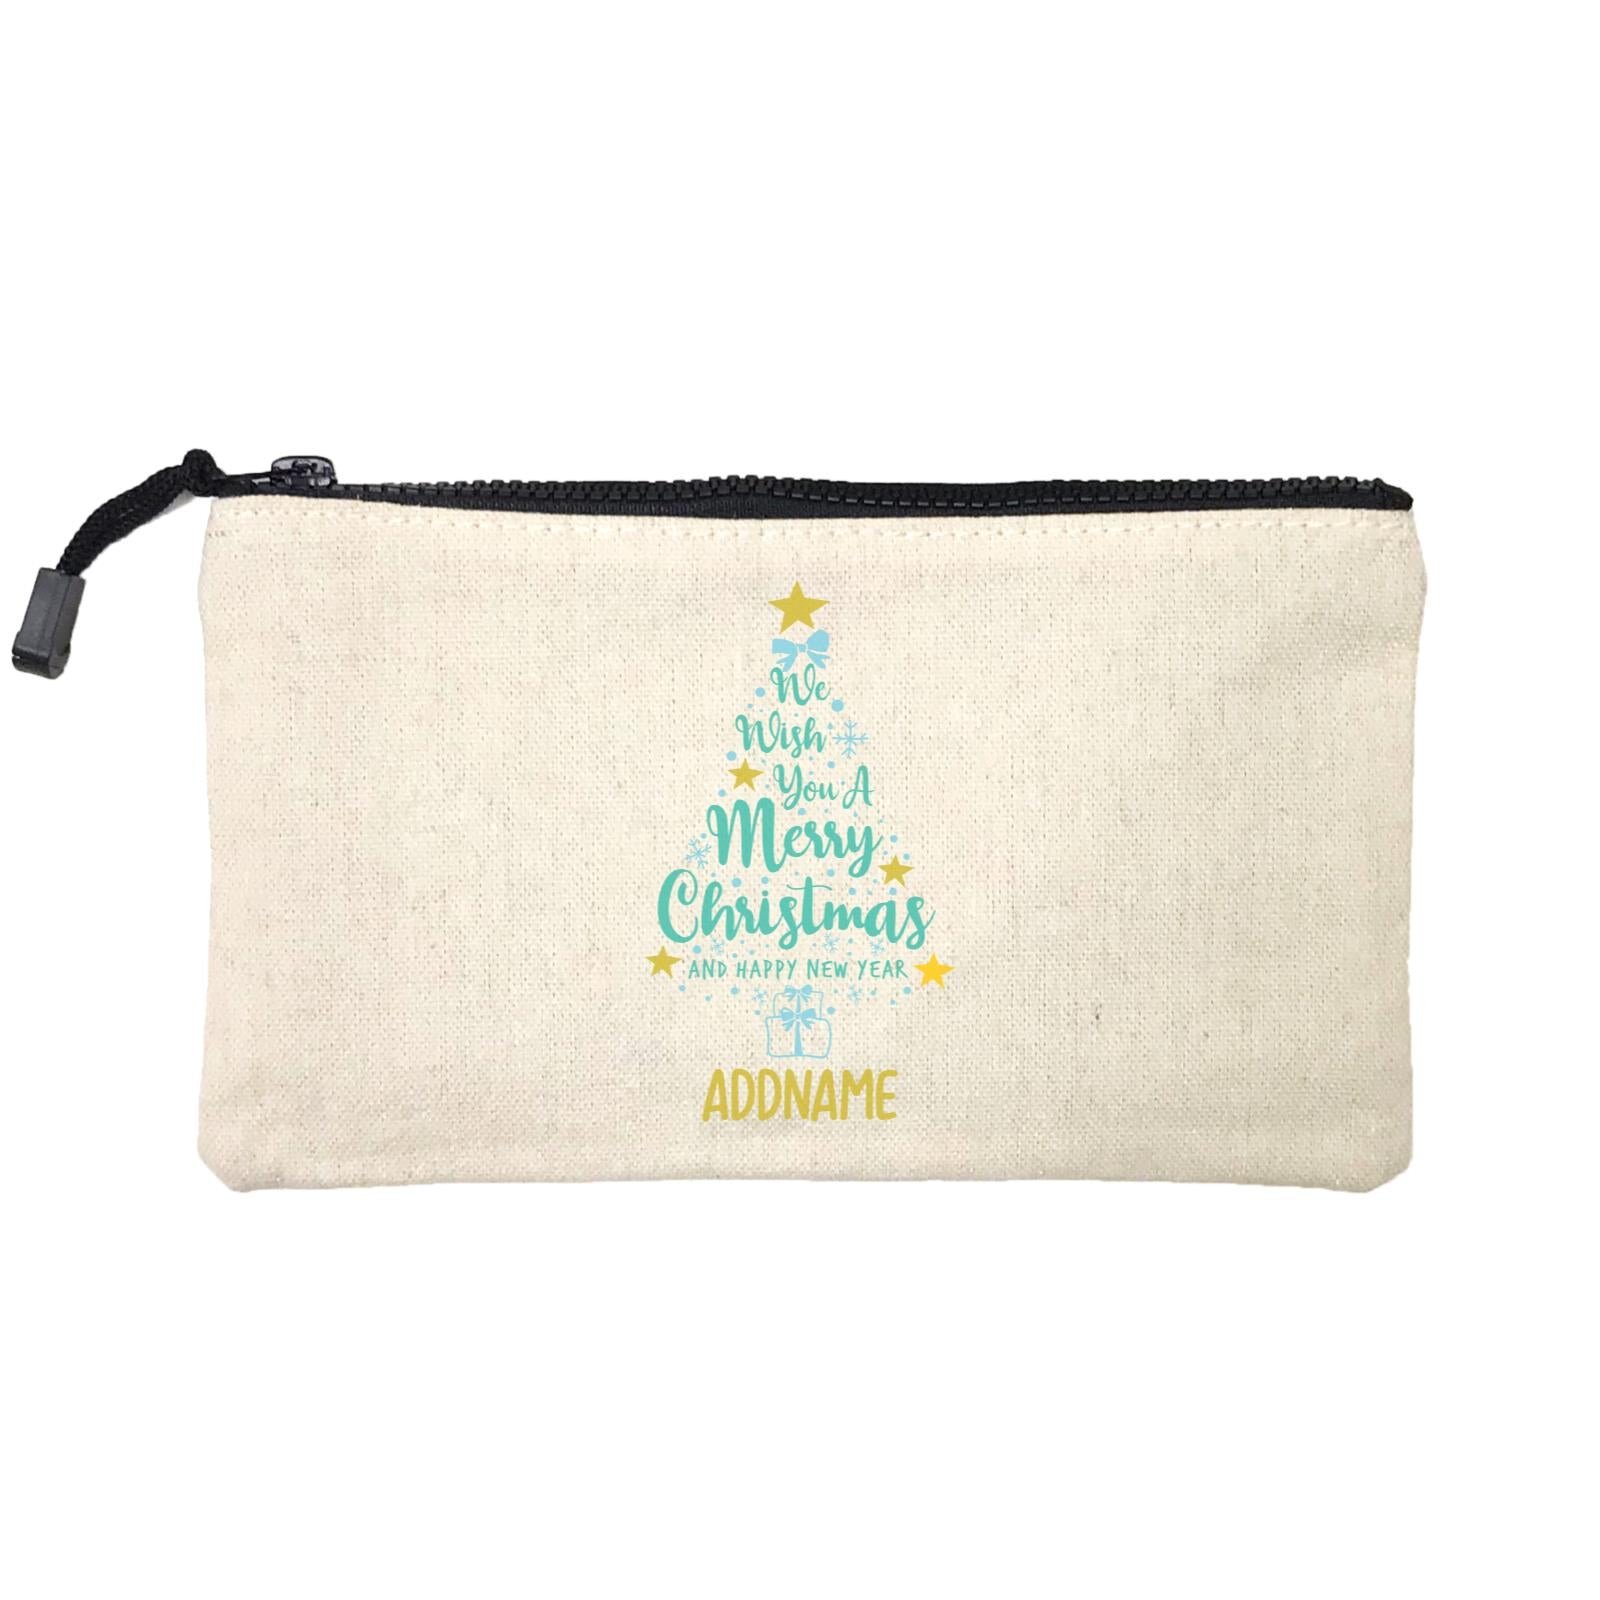 Xmas We Wish You A Merry Christmas and A Happy New Year Mini Accessories Stationery Pouch